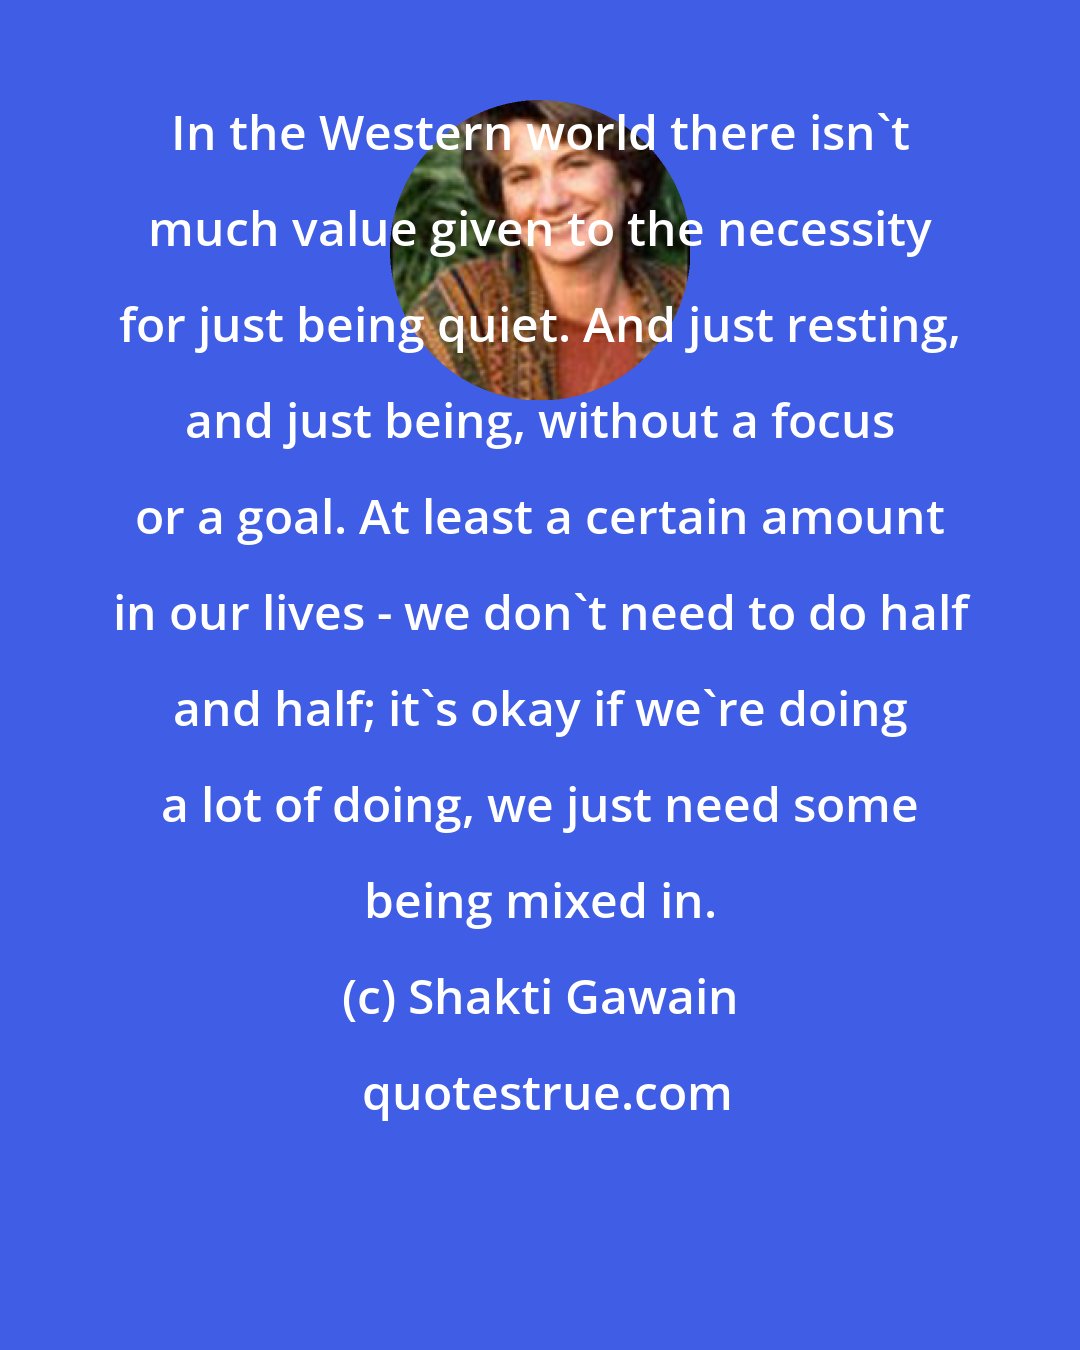 Shakti Gawain: In the Western world there isn't much value given to the necessity for just being quiet. And just resting, and just being, without a focus or a goal. At least a certain amount in our lives - we don't need to do half and half; it's okay if we're doing a lot of doing, we just need some being mixed in.